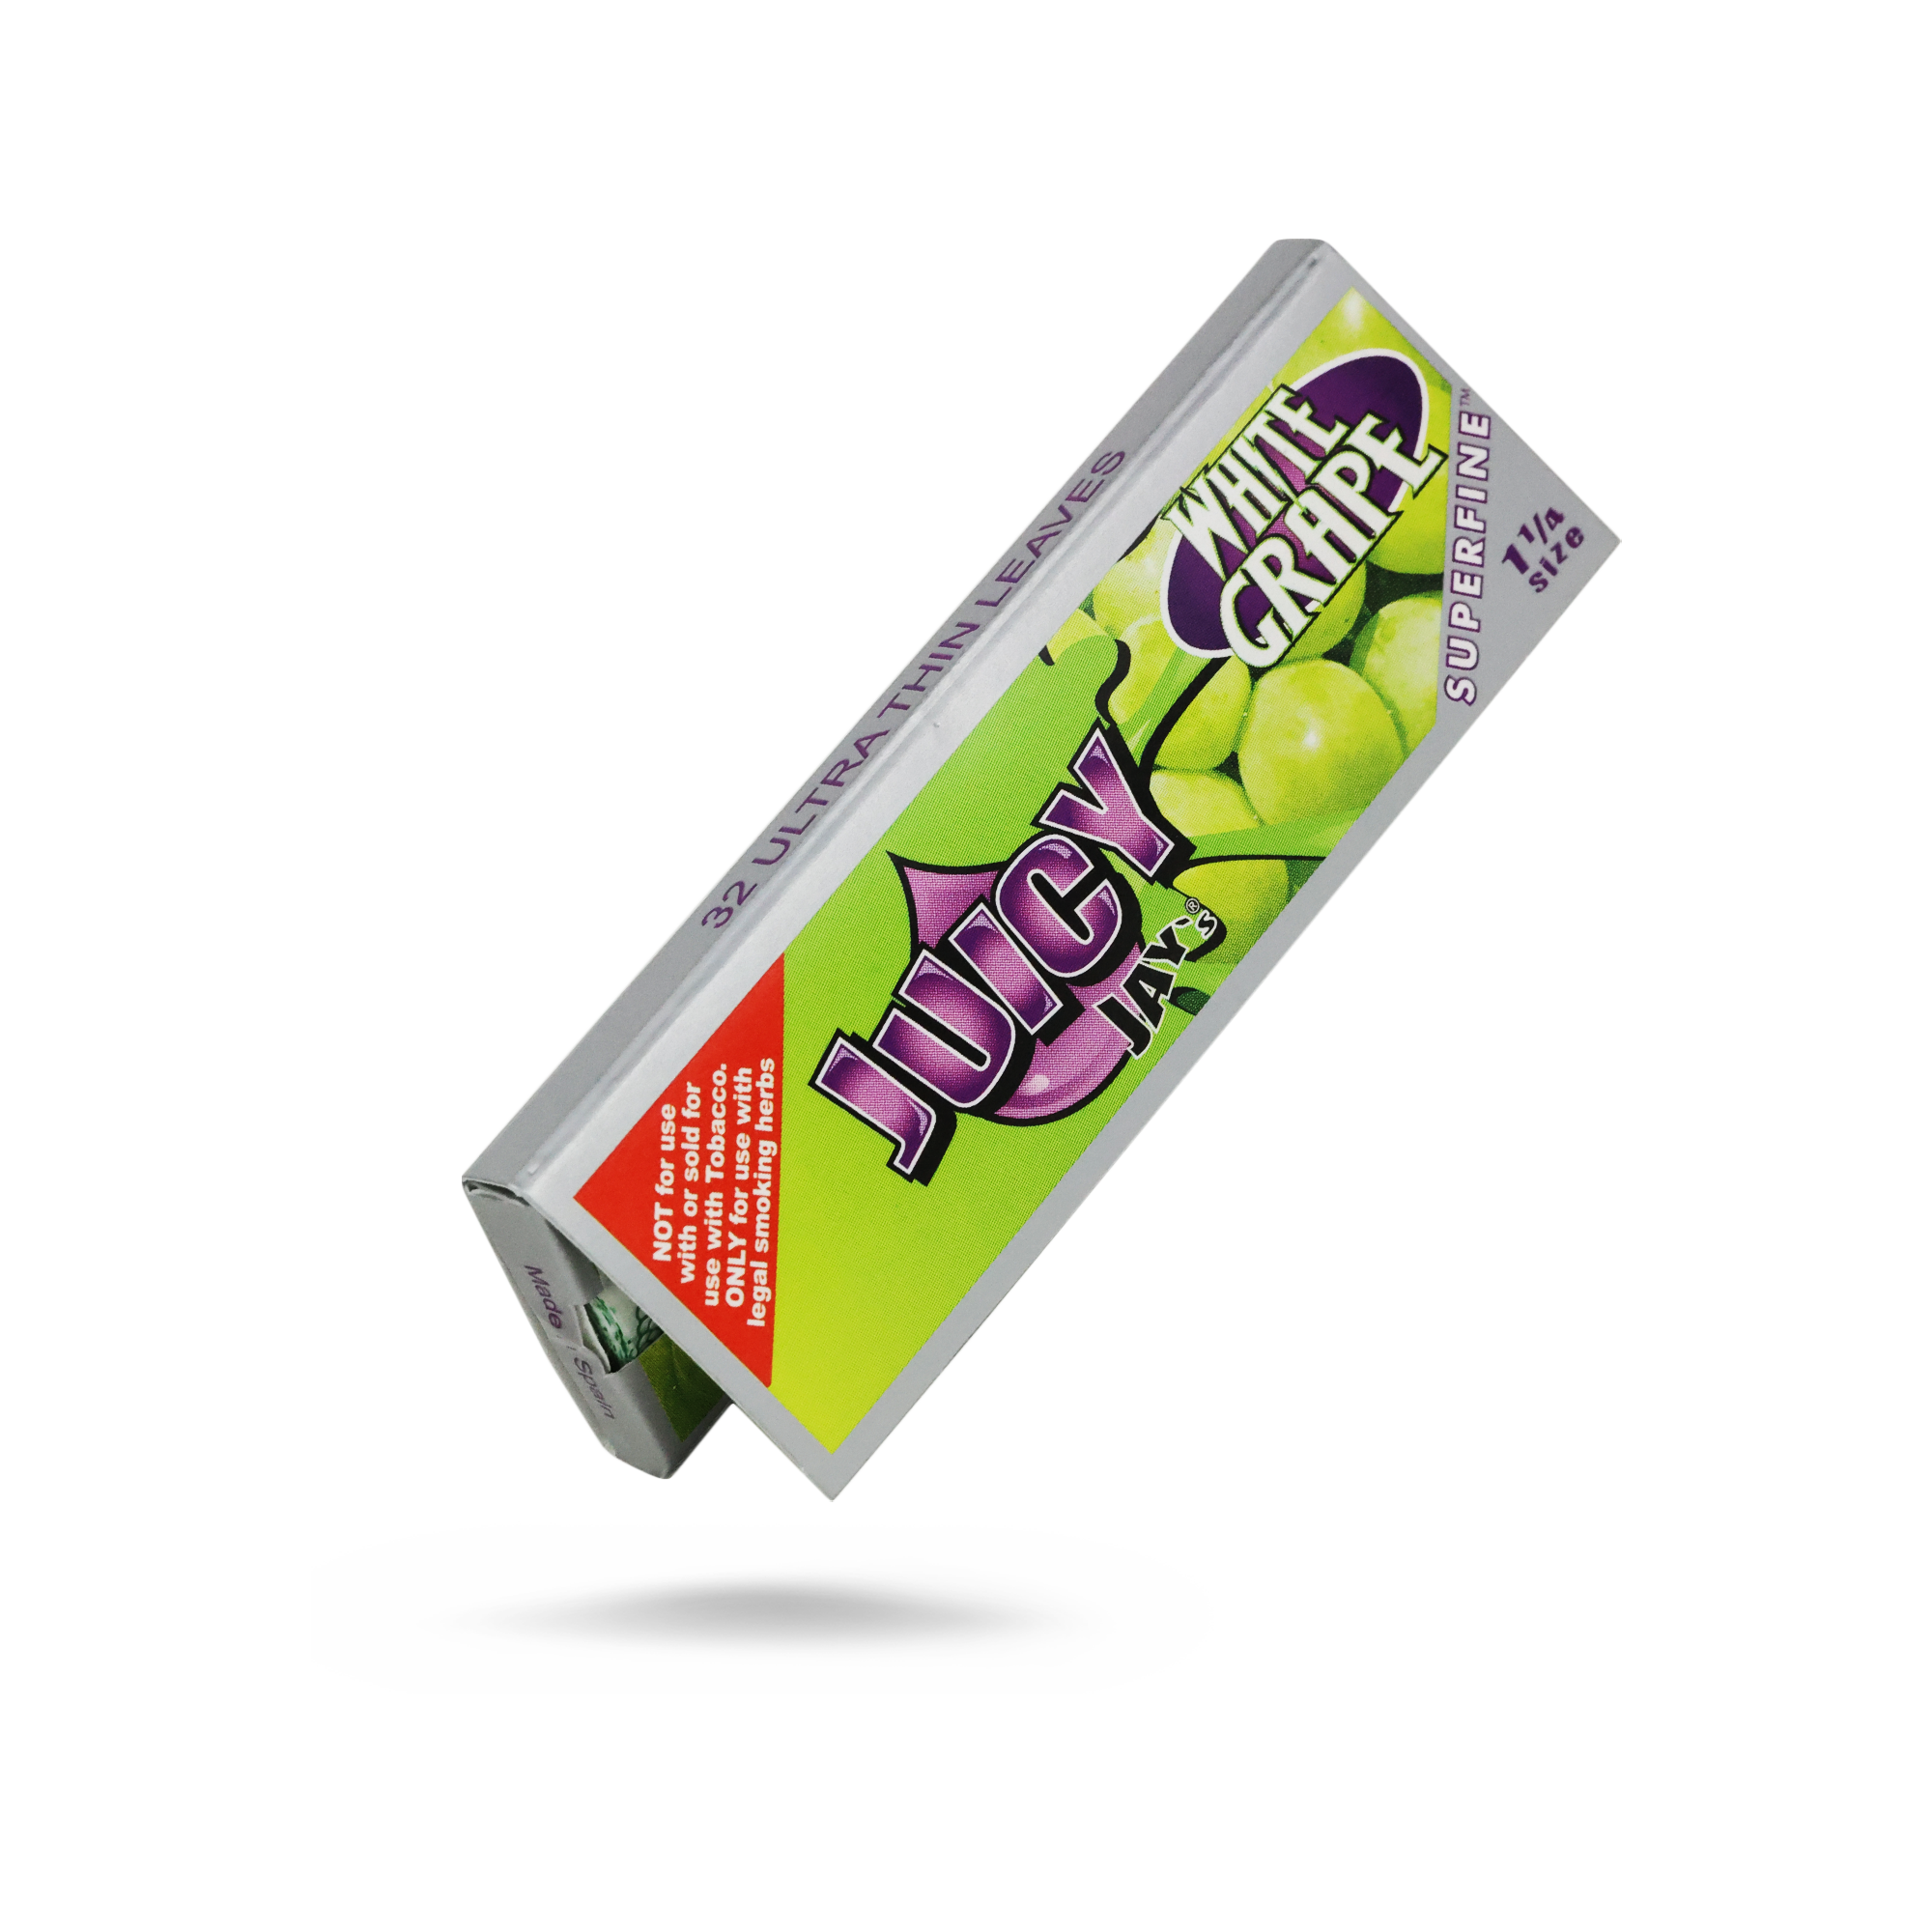 Juicy Jays 1 1/4 Superfine White Grape Flavored Hemp Rolling Papers Rolling Papers JAY10034-1/24 esd-official